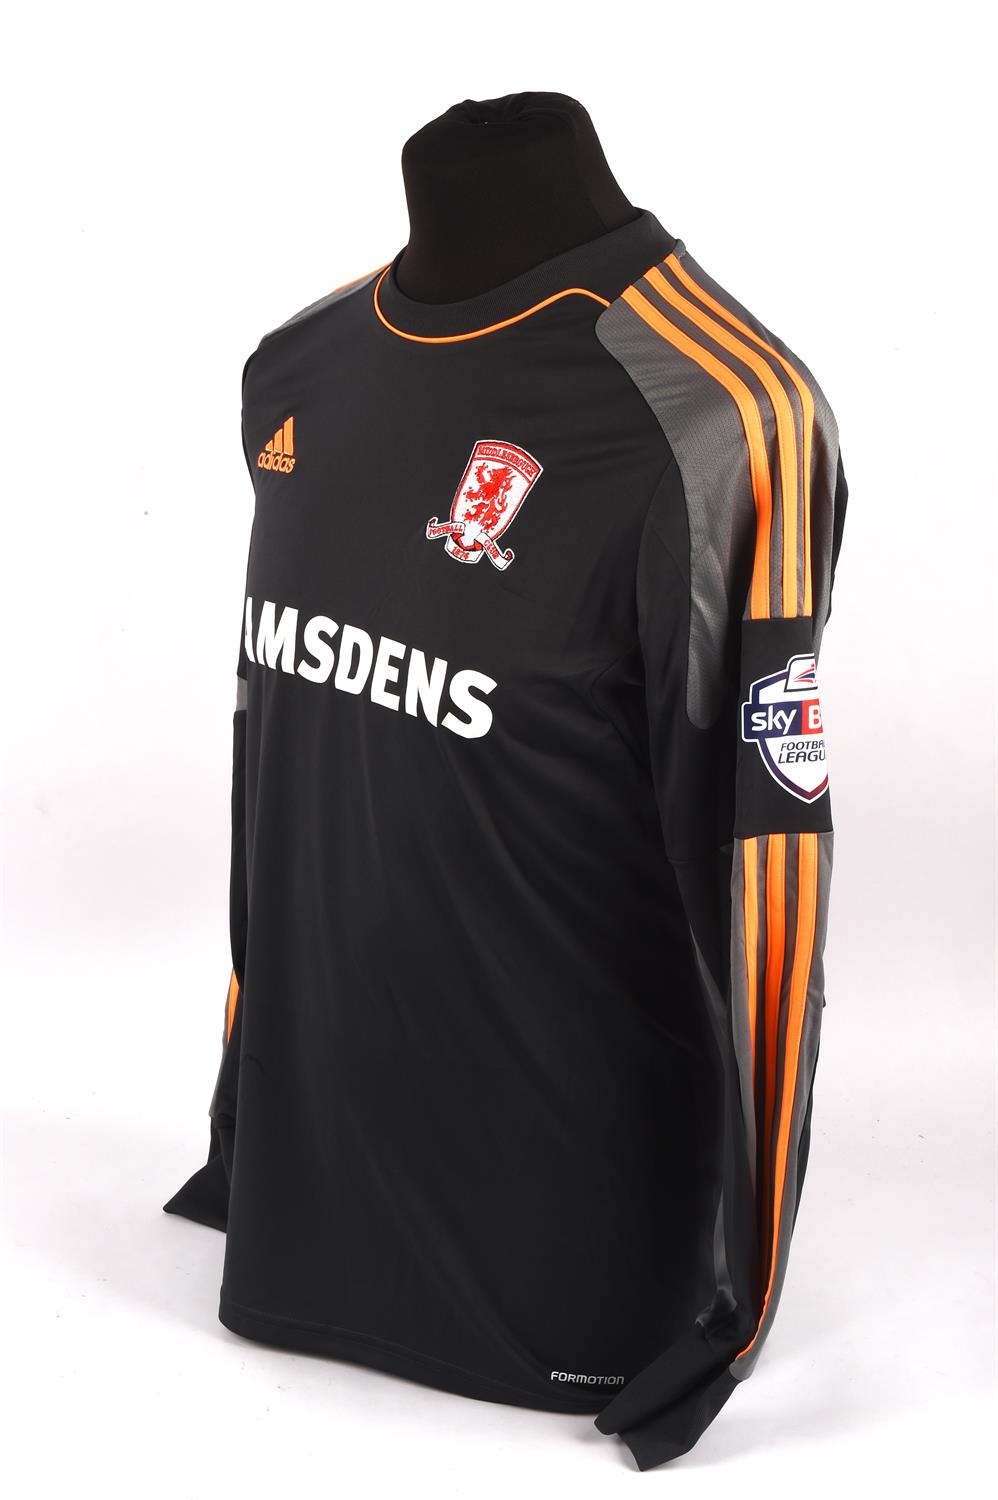 Middlesbrough Football club, Shay Given (No.12) Match worn 2013-2014 shirt L/S. Provenance Kitman. - Image 2 of 2